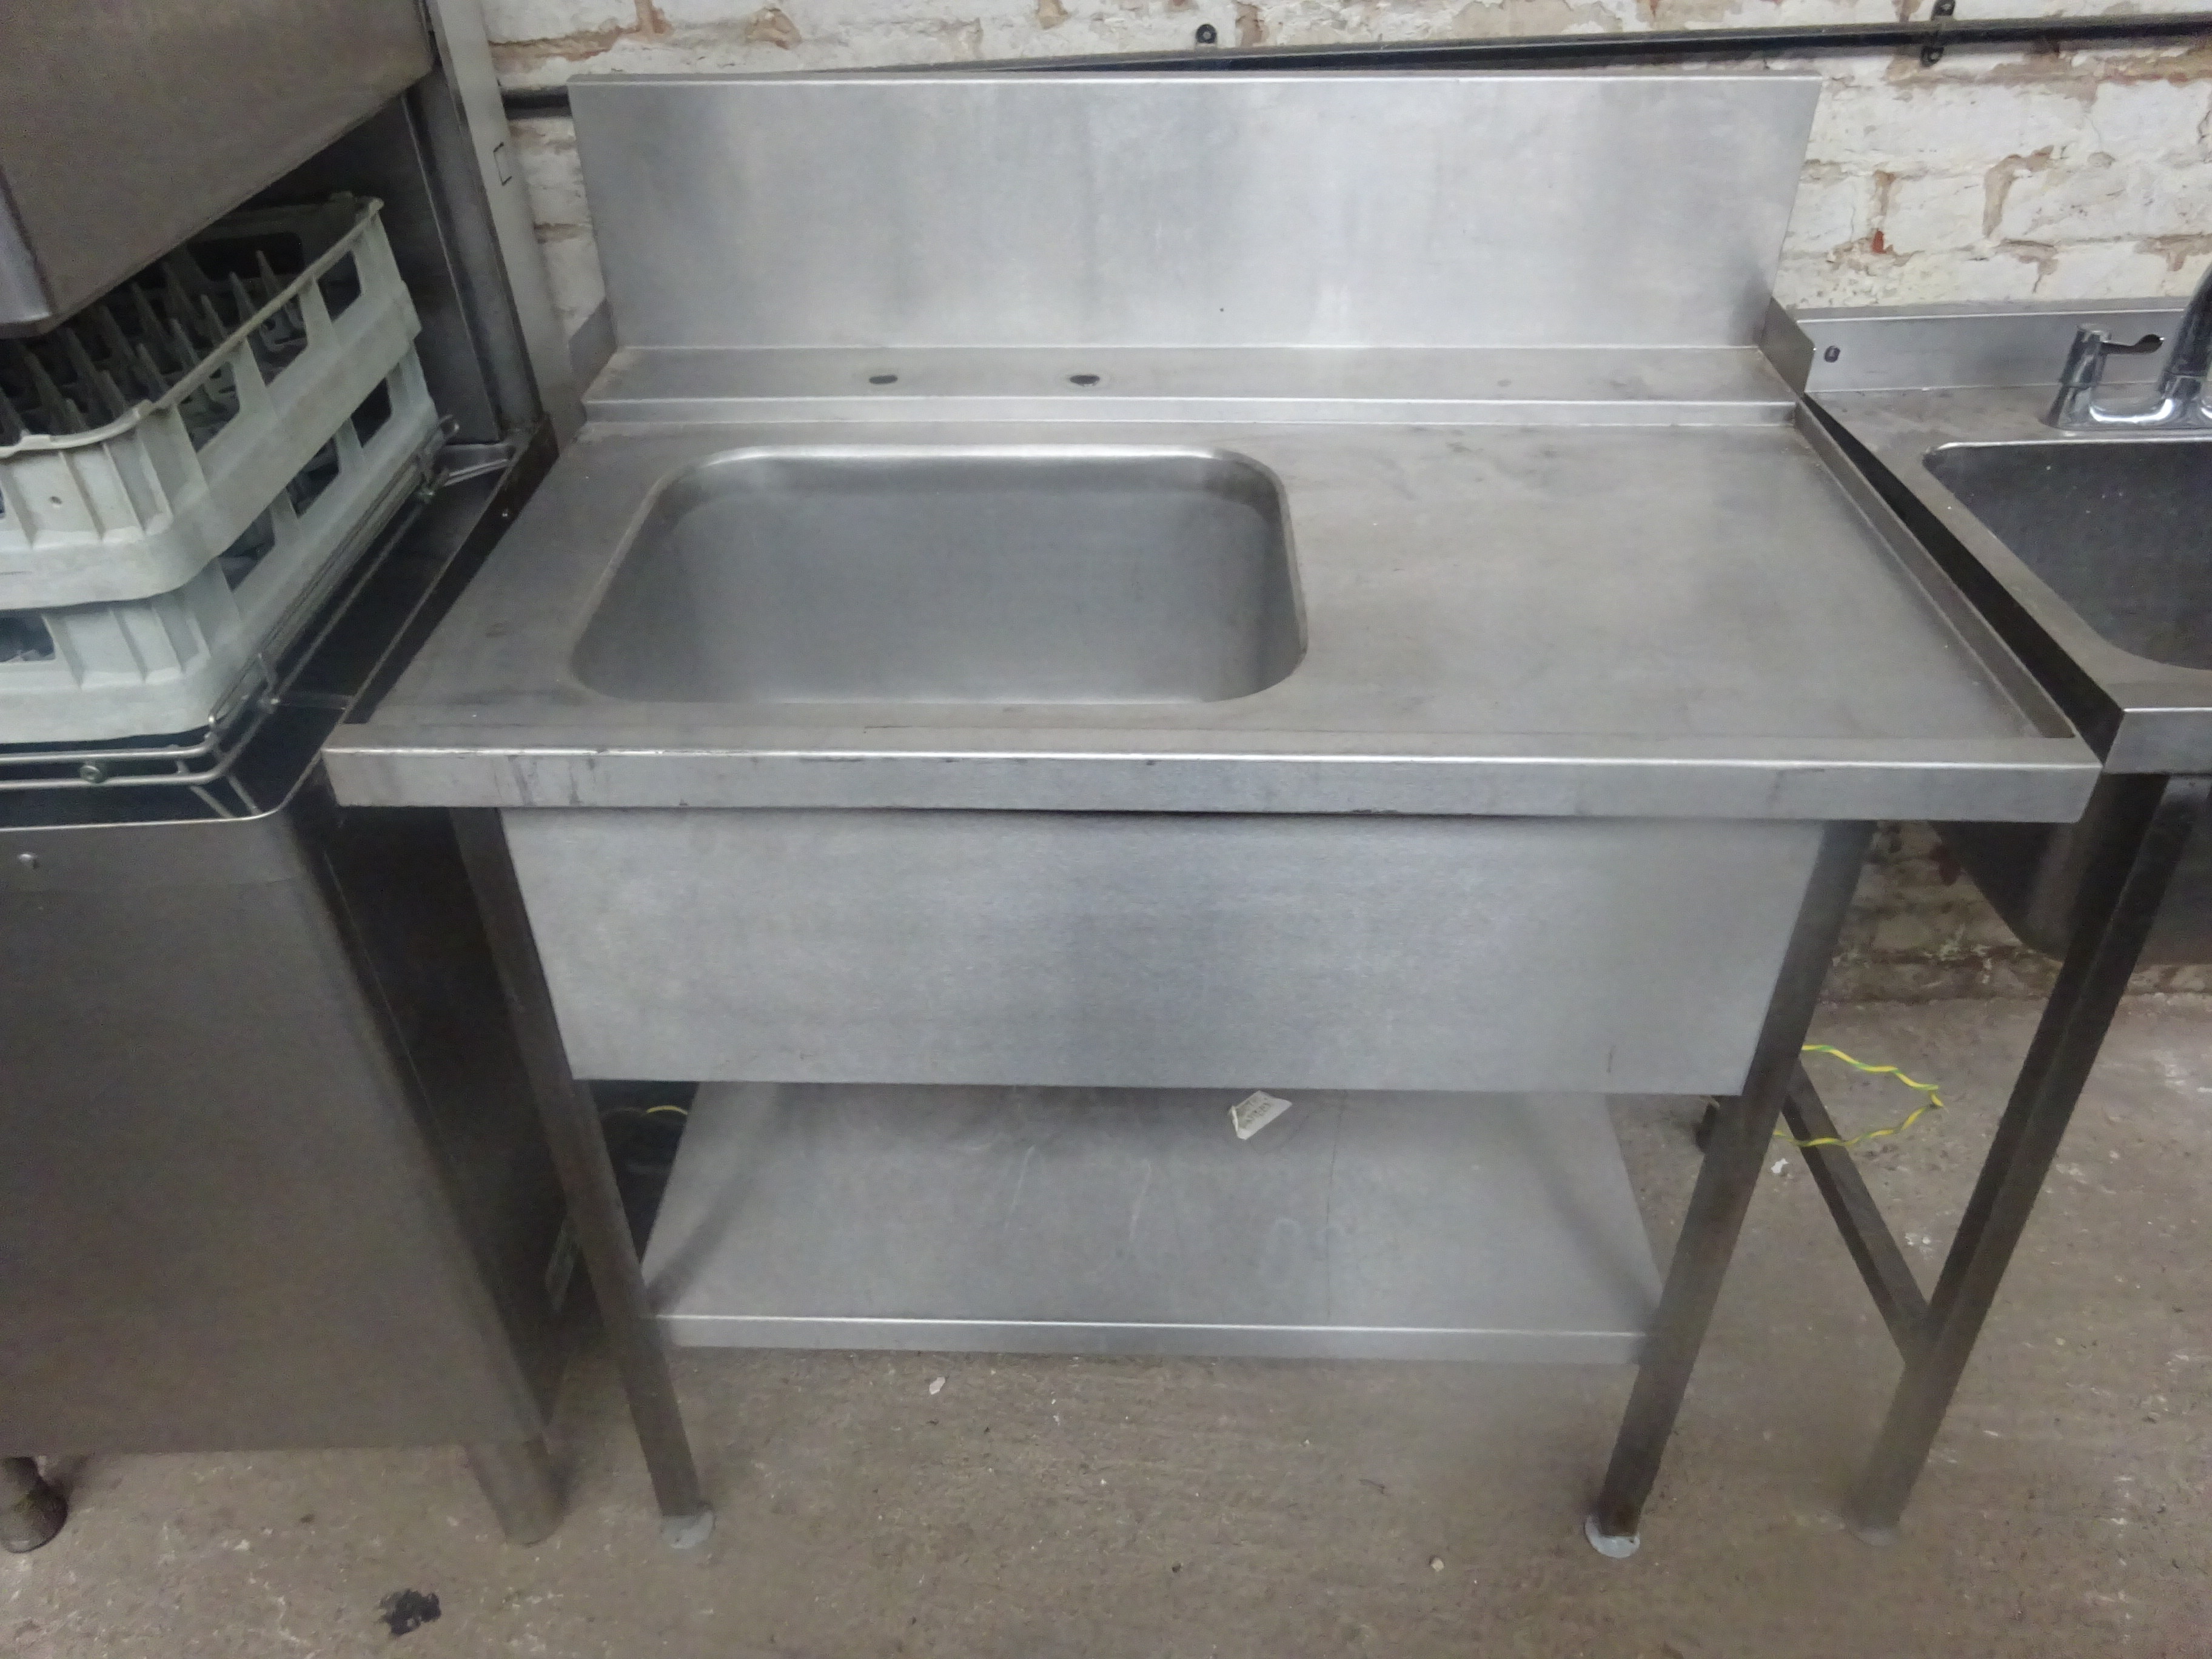 Maidaid halcyon RU81CRPBUT dishwasher with tray table & sink - Image 4 of 5